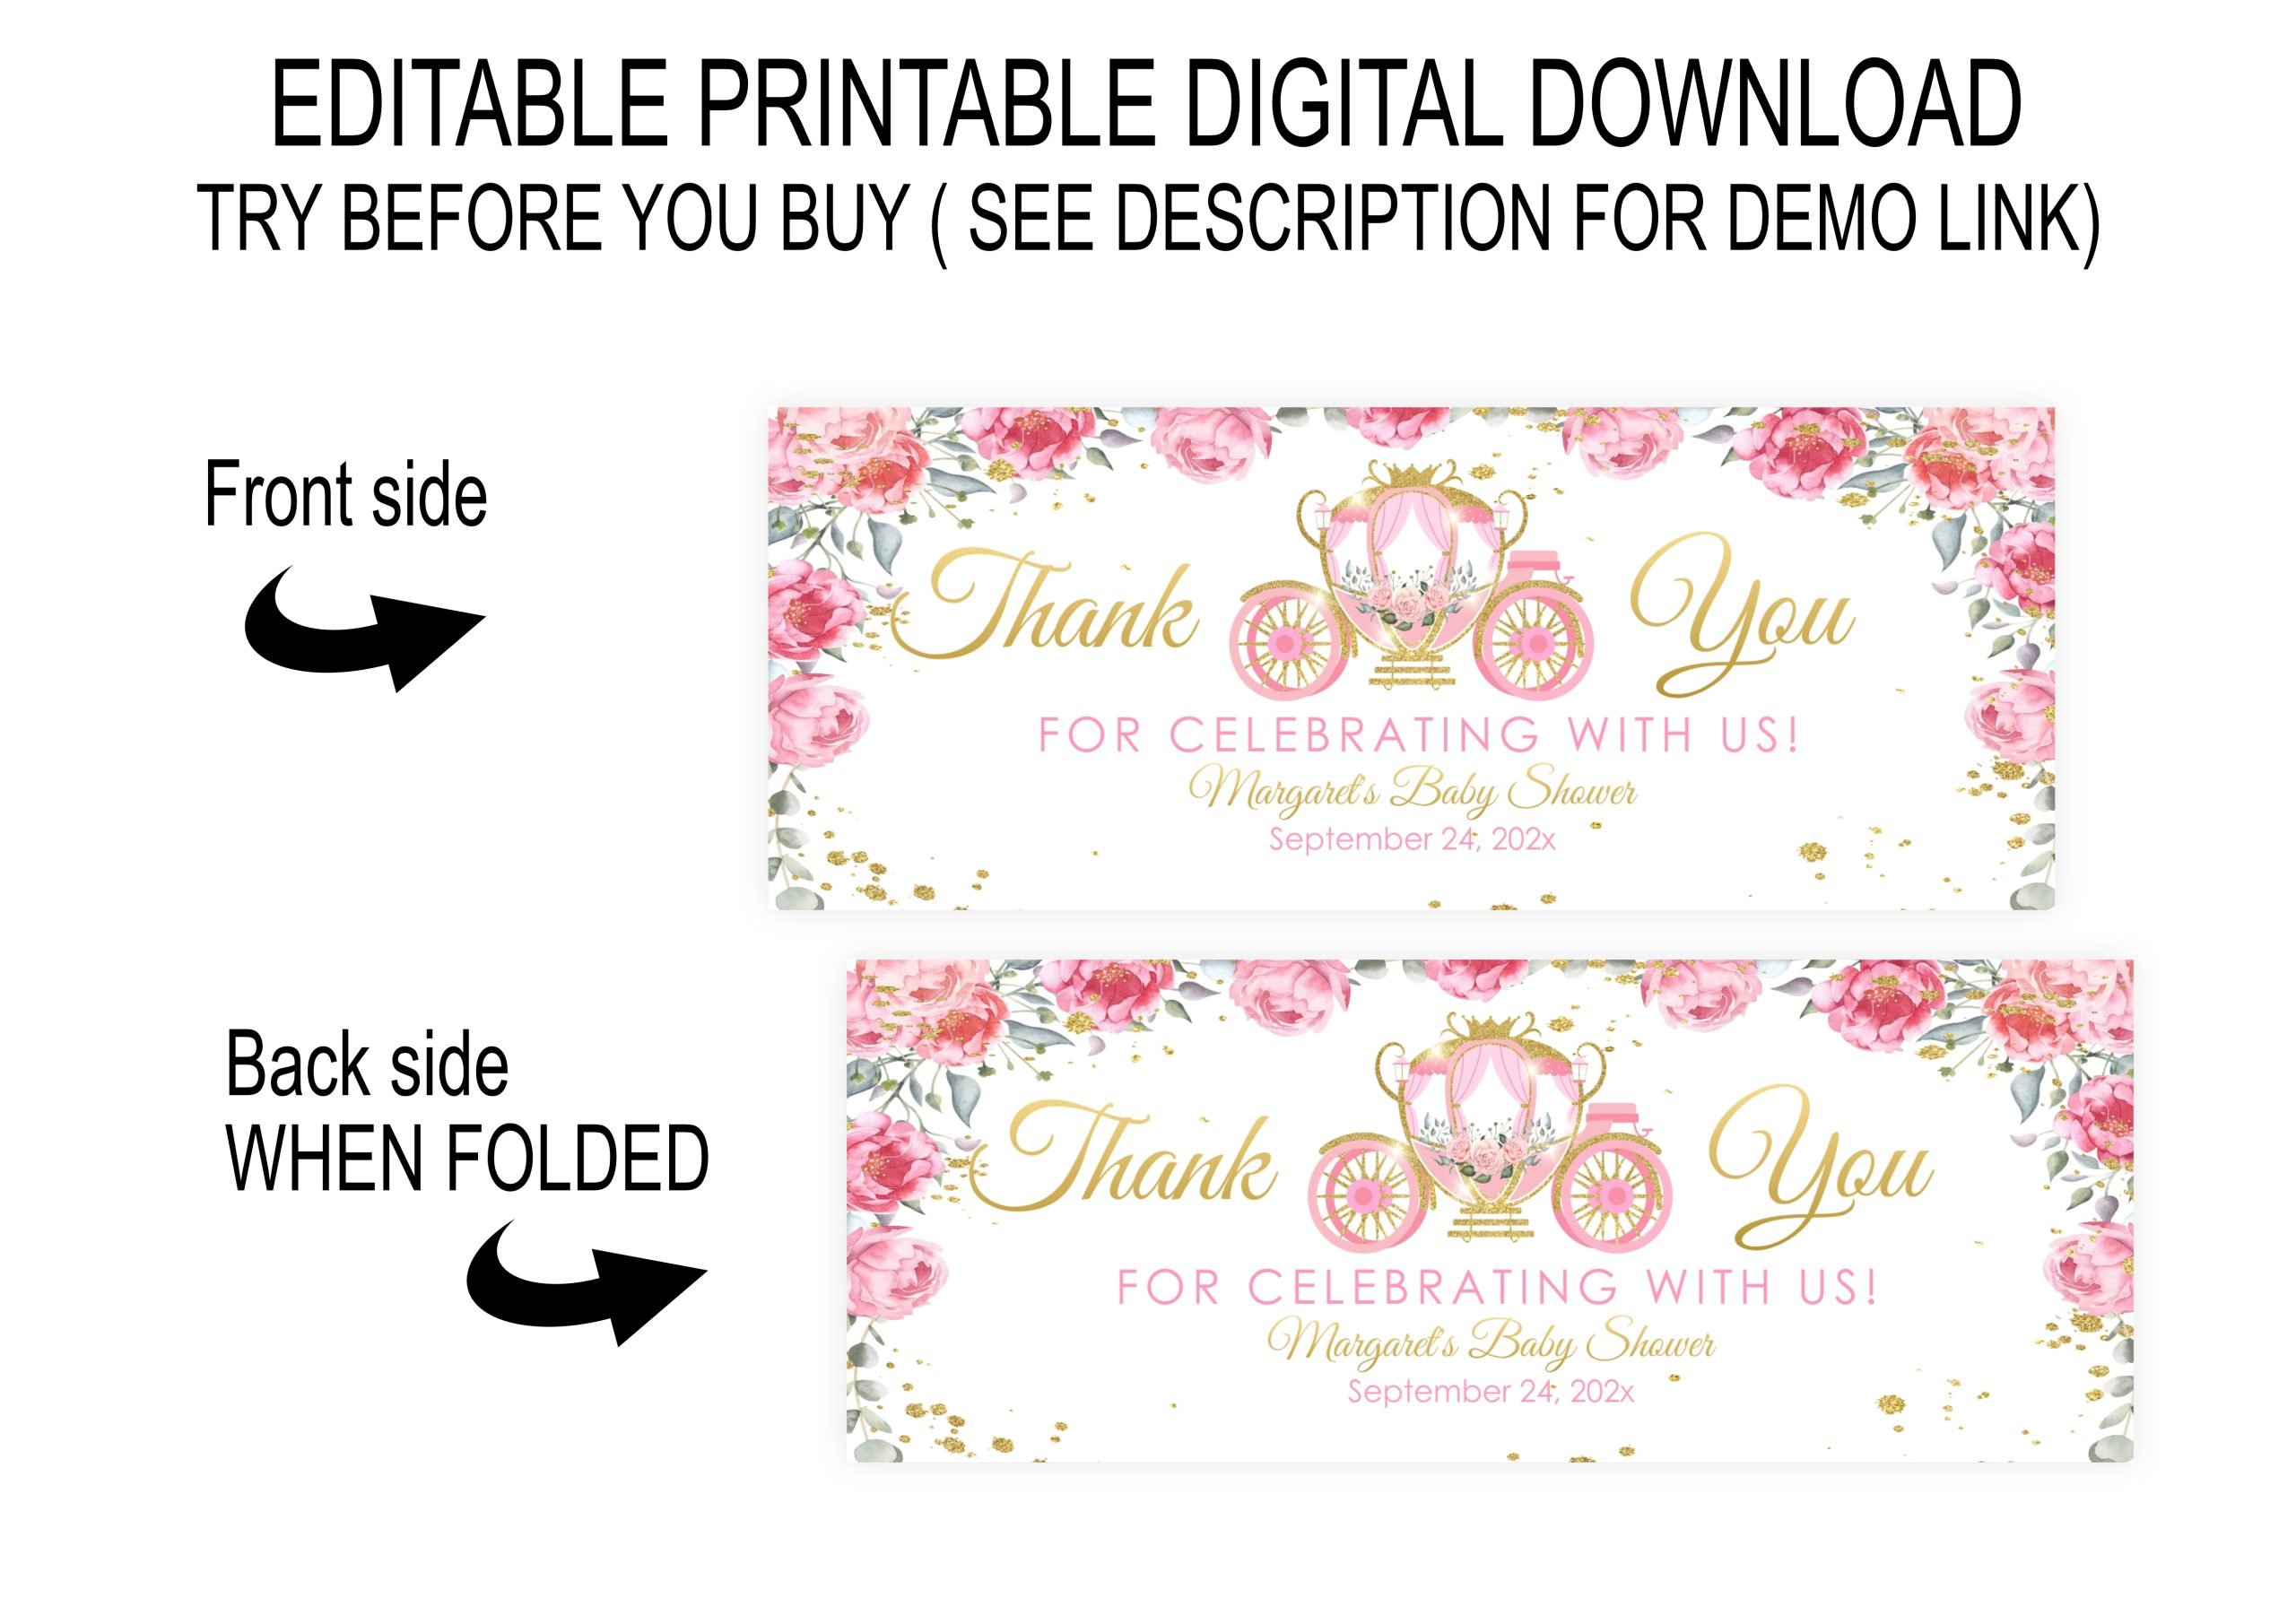 TAGS | LABELS Editable Princess Treat Bag Topper | Baby Shower Birthday Party | Pink Flower | Favor Label | Digital Download Birthday Party Favor Label